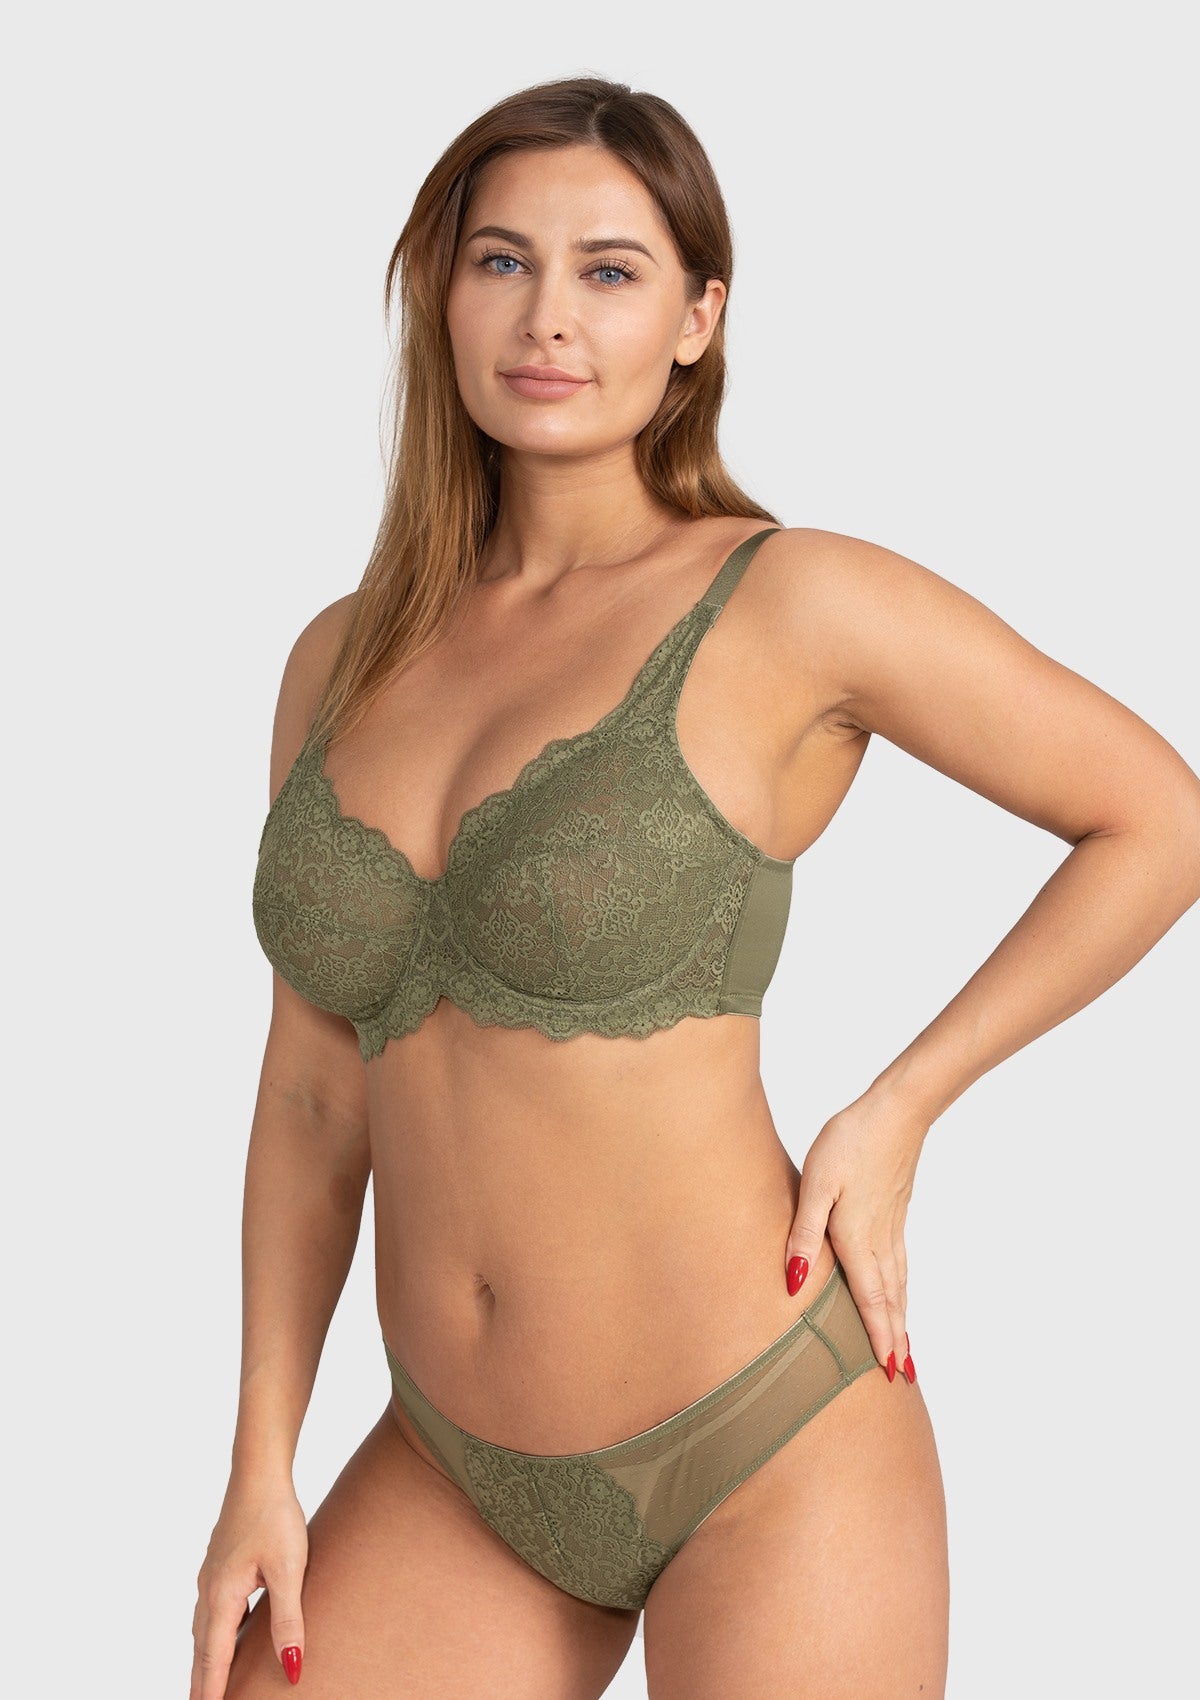 HSIA All-Over Floral Lace Unlined Bra: Minimizer Bra For Heavy Breasts - Dark Green / 42 / DDD/F